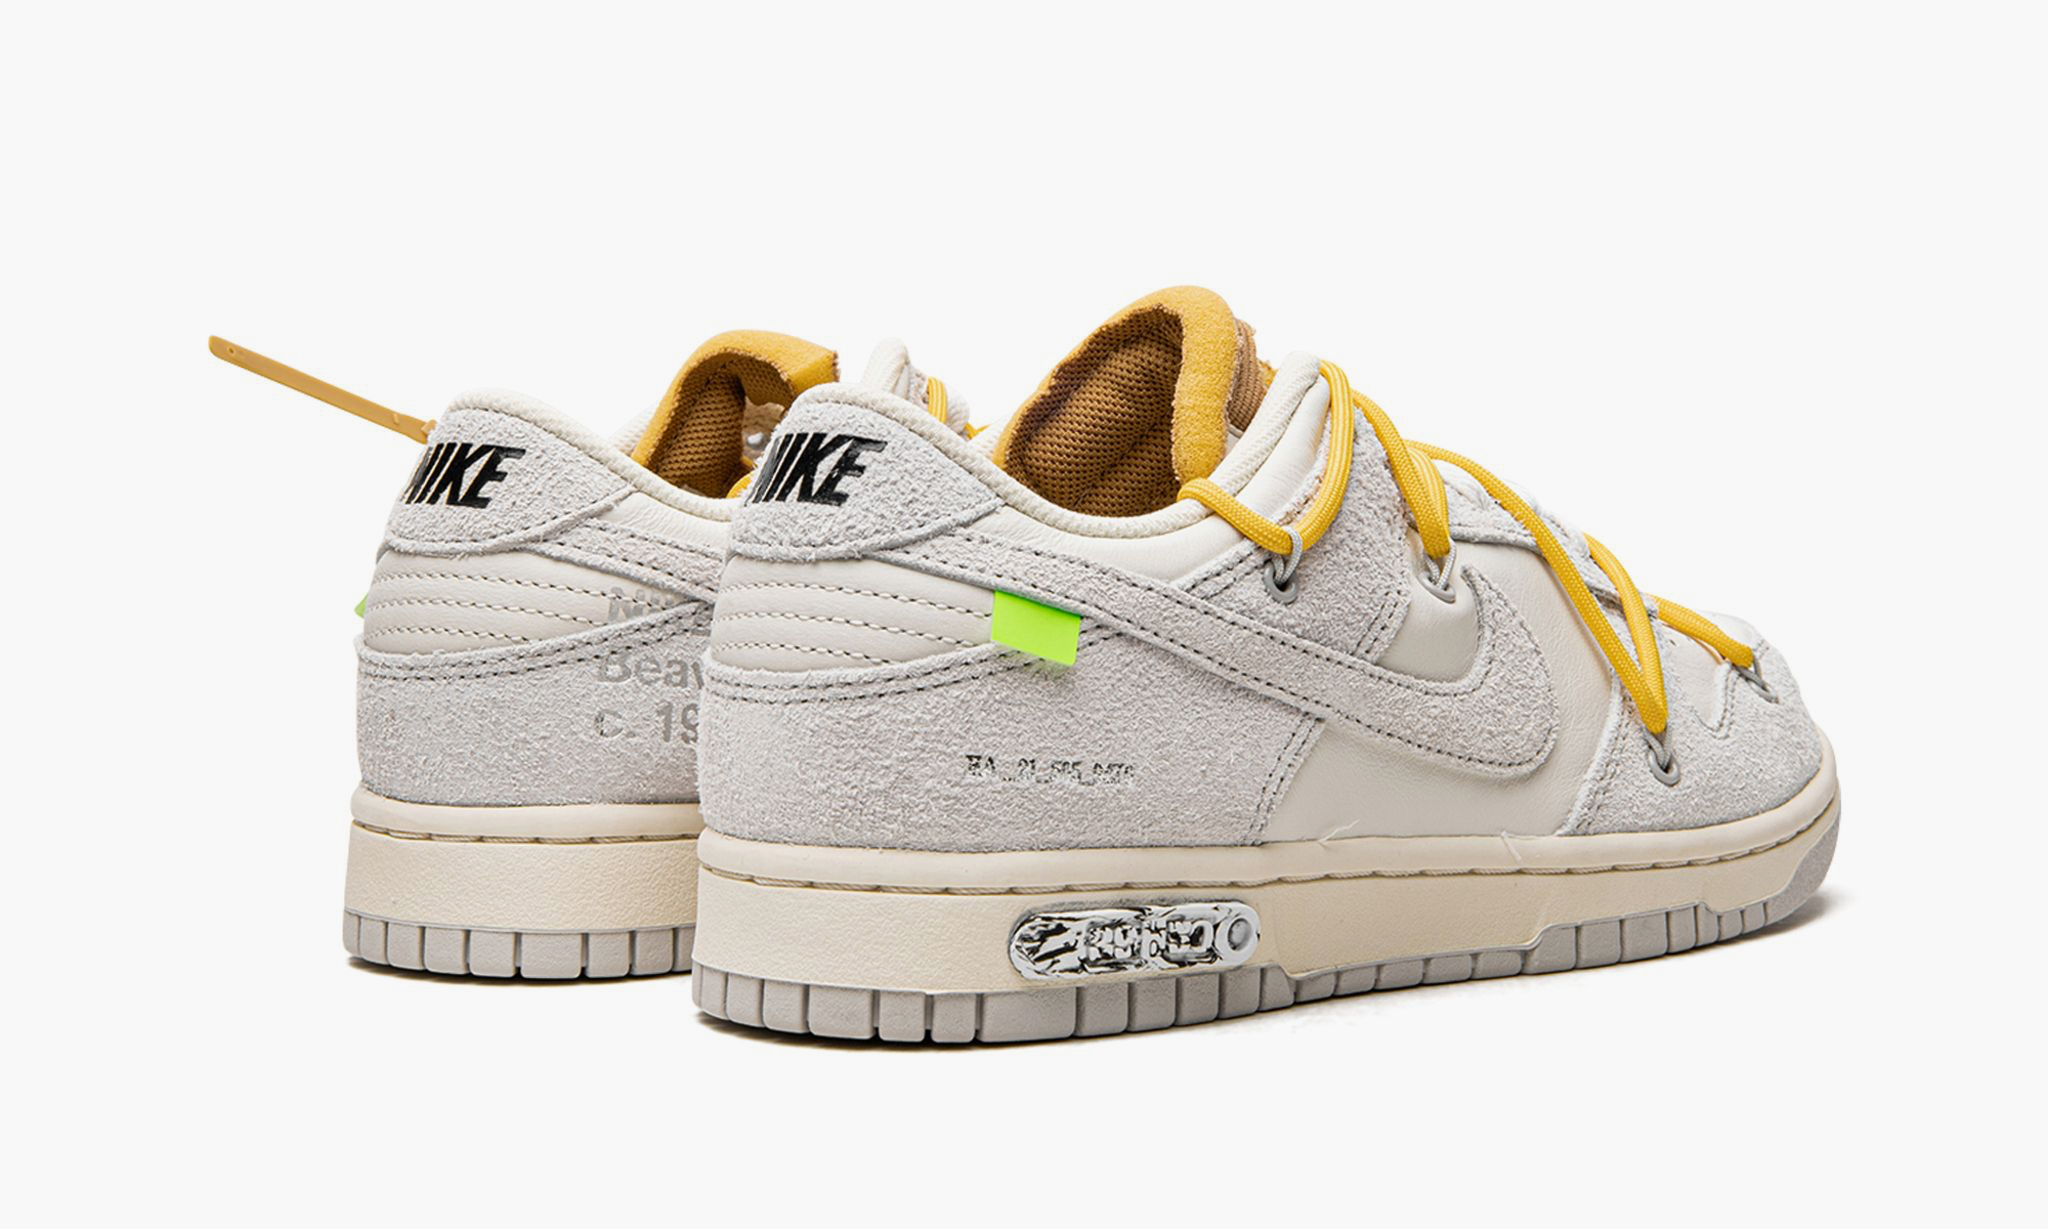 Nike Dunk Low off White. Nike SB Dunk Low x off-White. Off-White x Nike Dunk Low lot. Dunk lot 104. White a lot